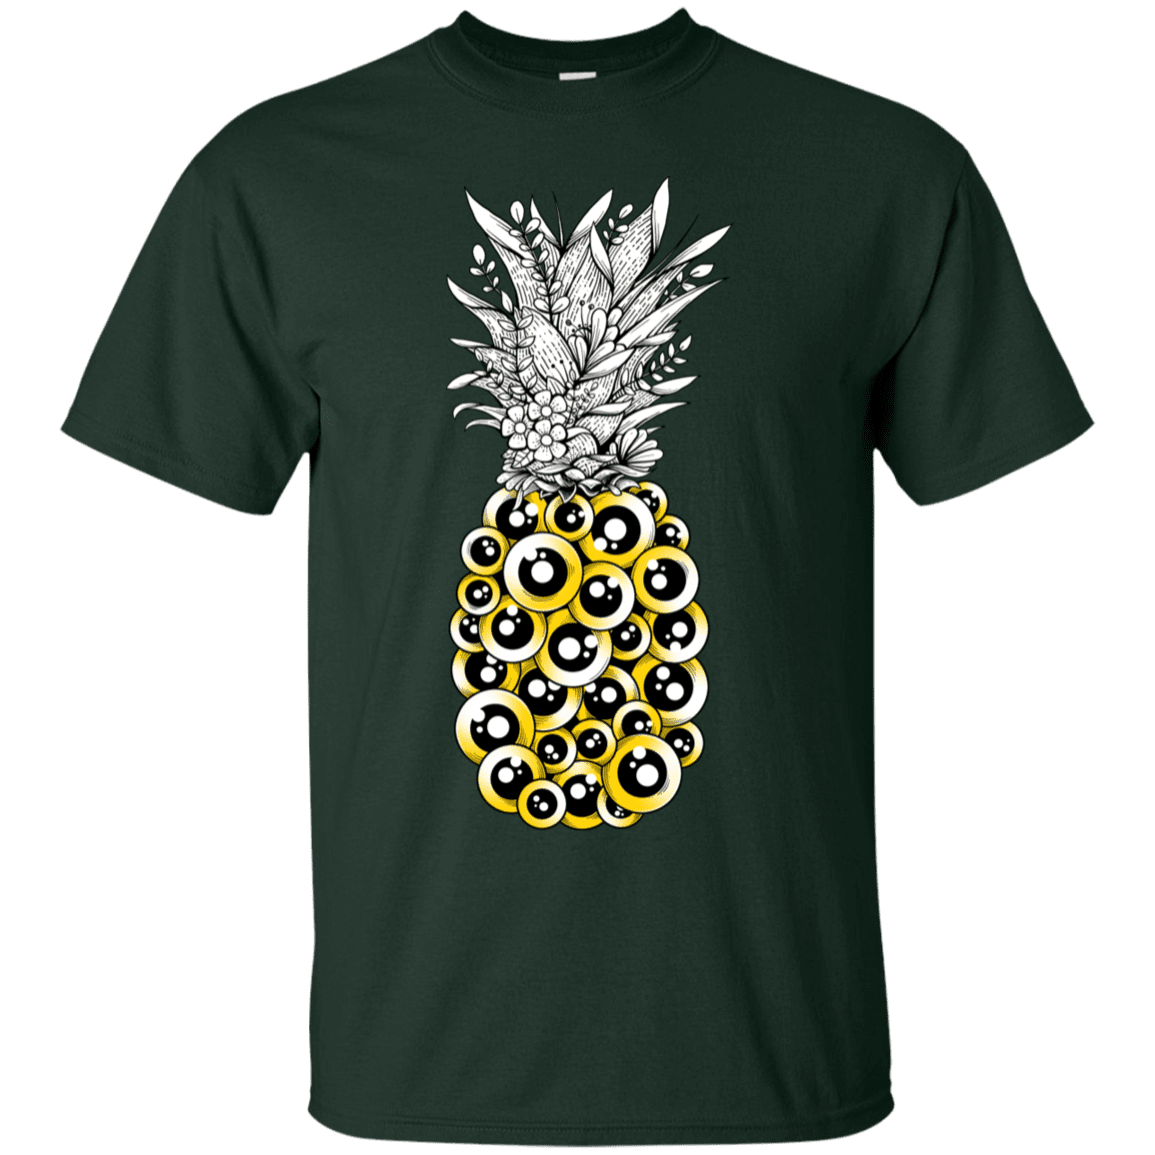 T-Shirts Forest / S Tropical Illusion T-Shirt